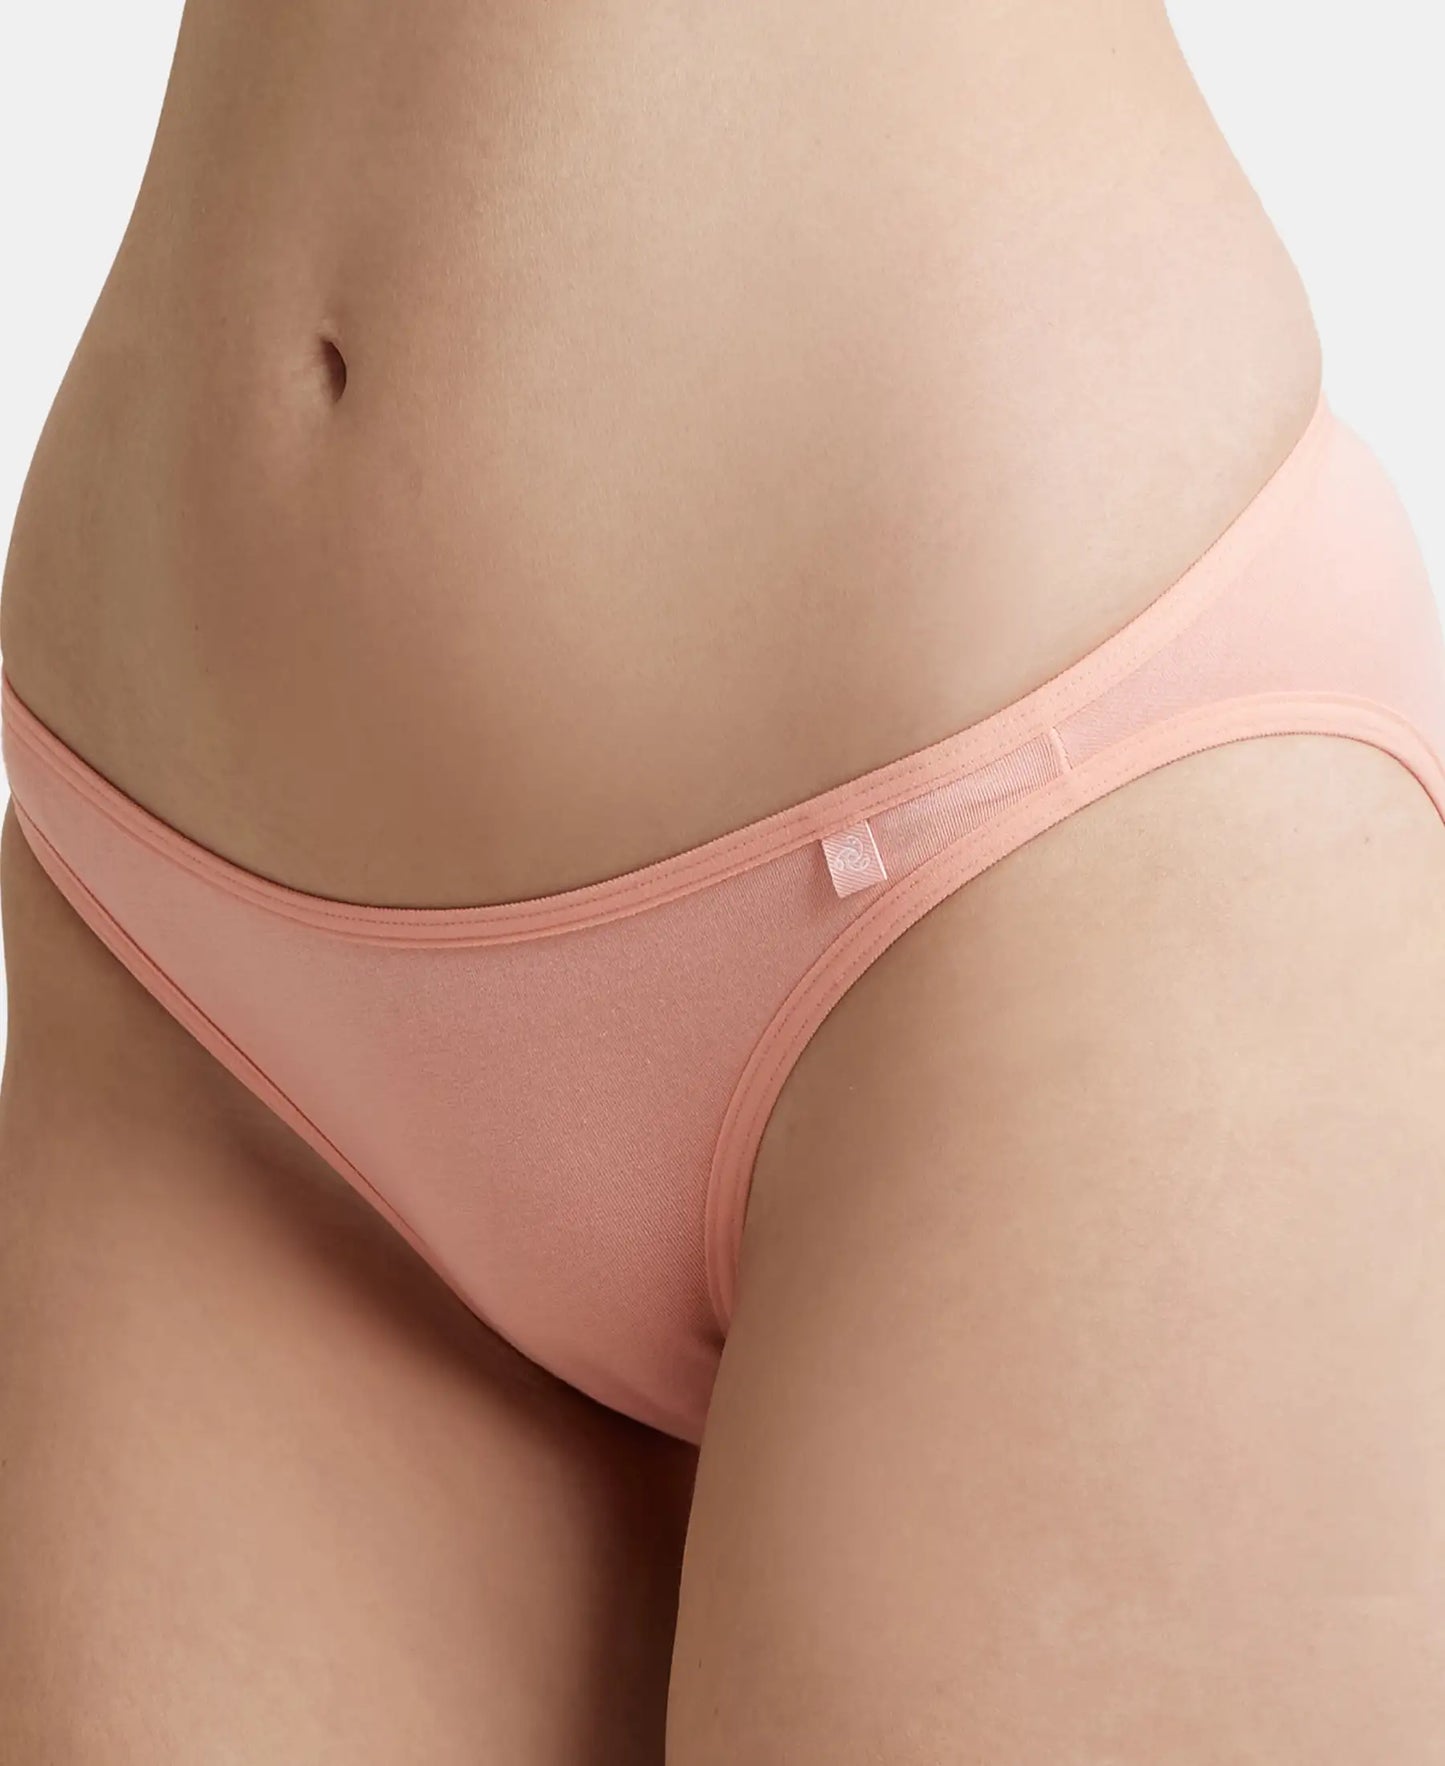 Super Combed Cotton Elastane Low Waist Bikini With Concealed Waistband and StayFresh Treatment - Candlelight Peach-6